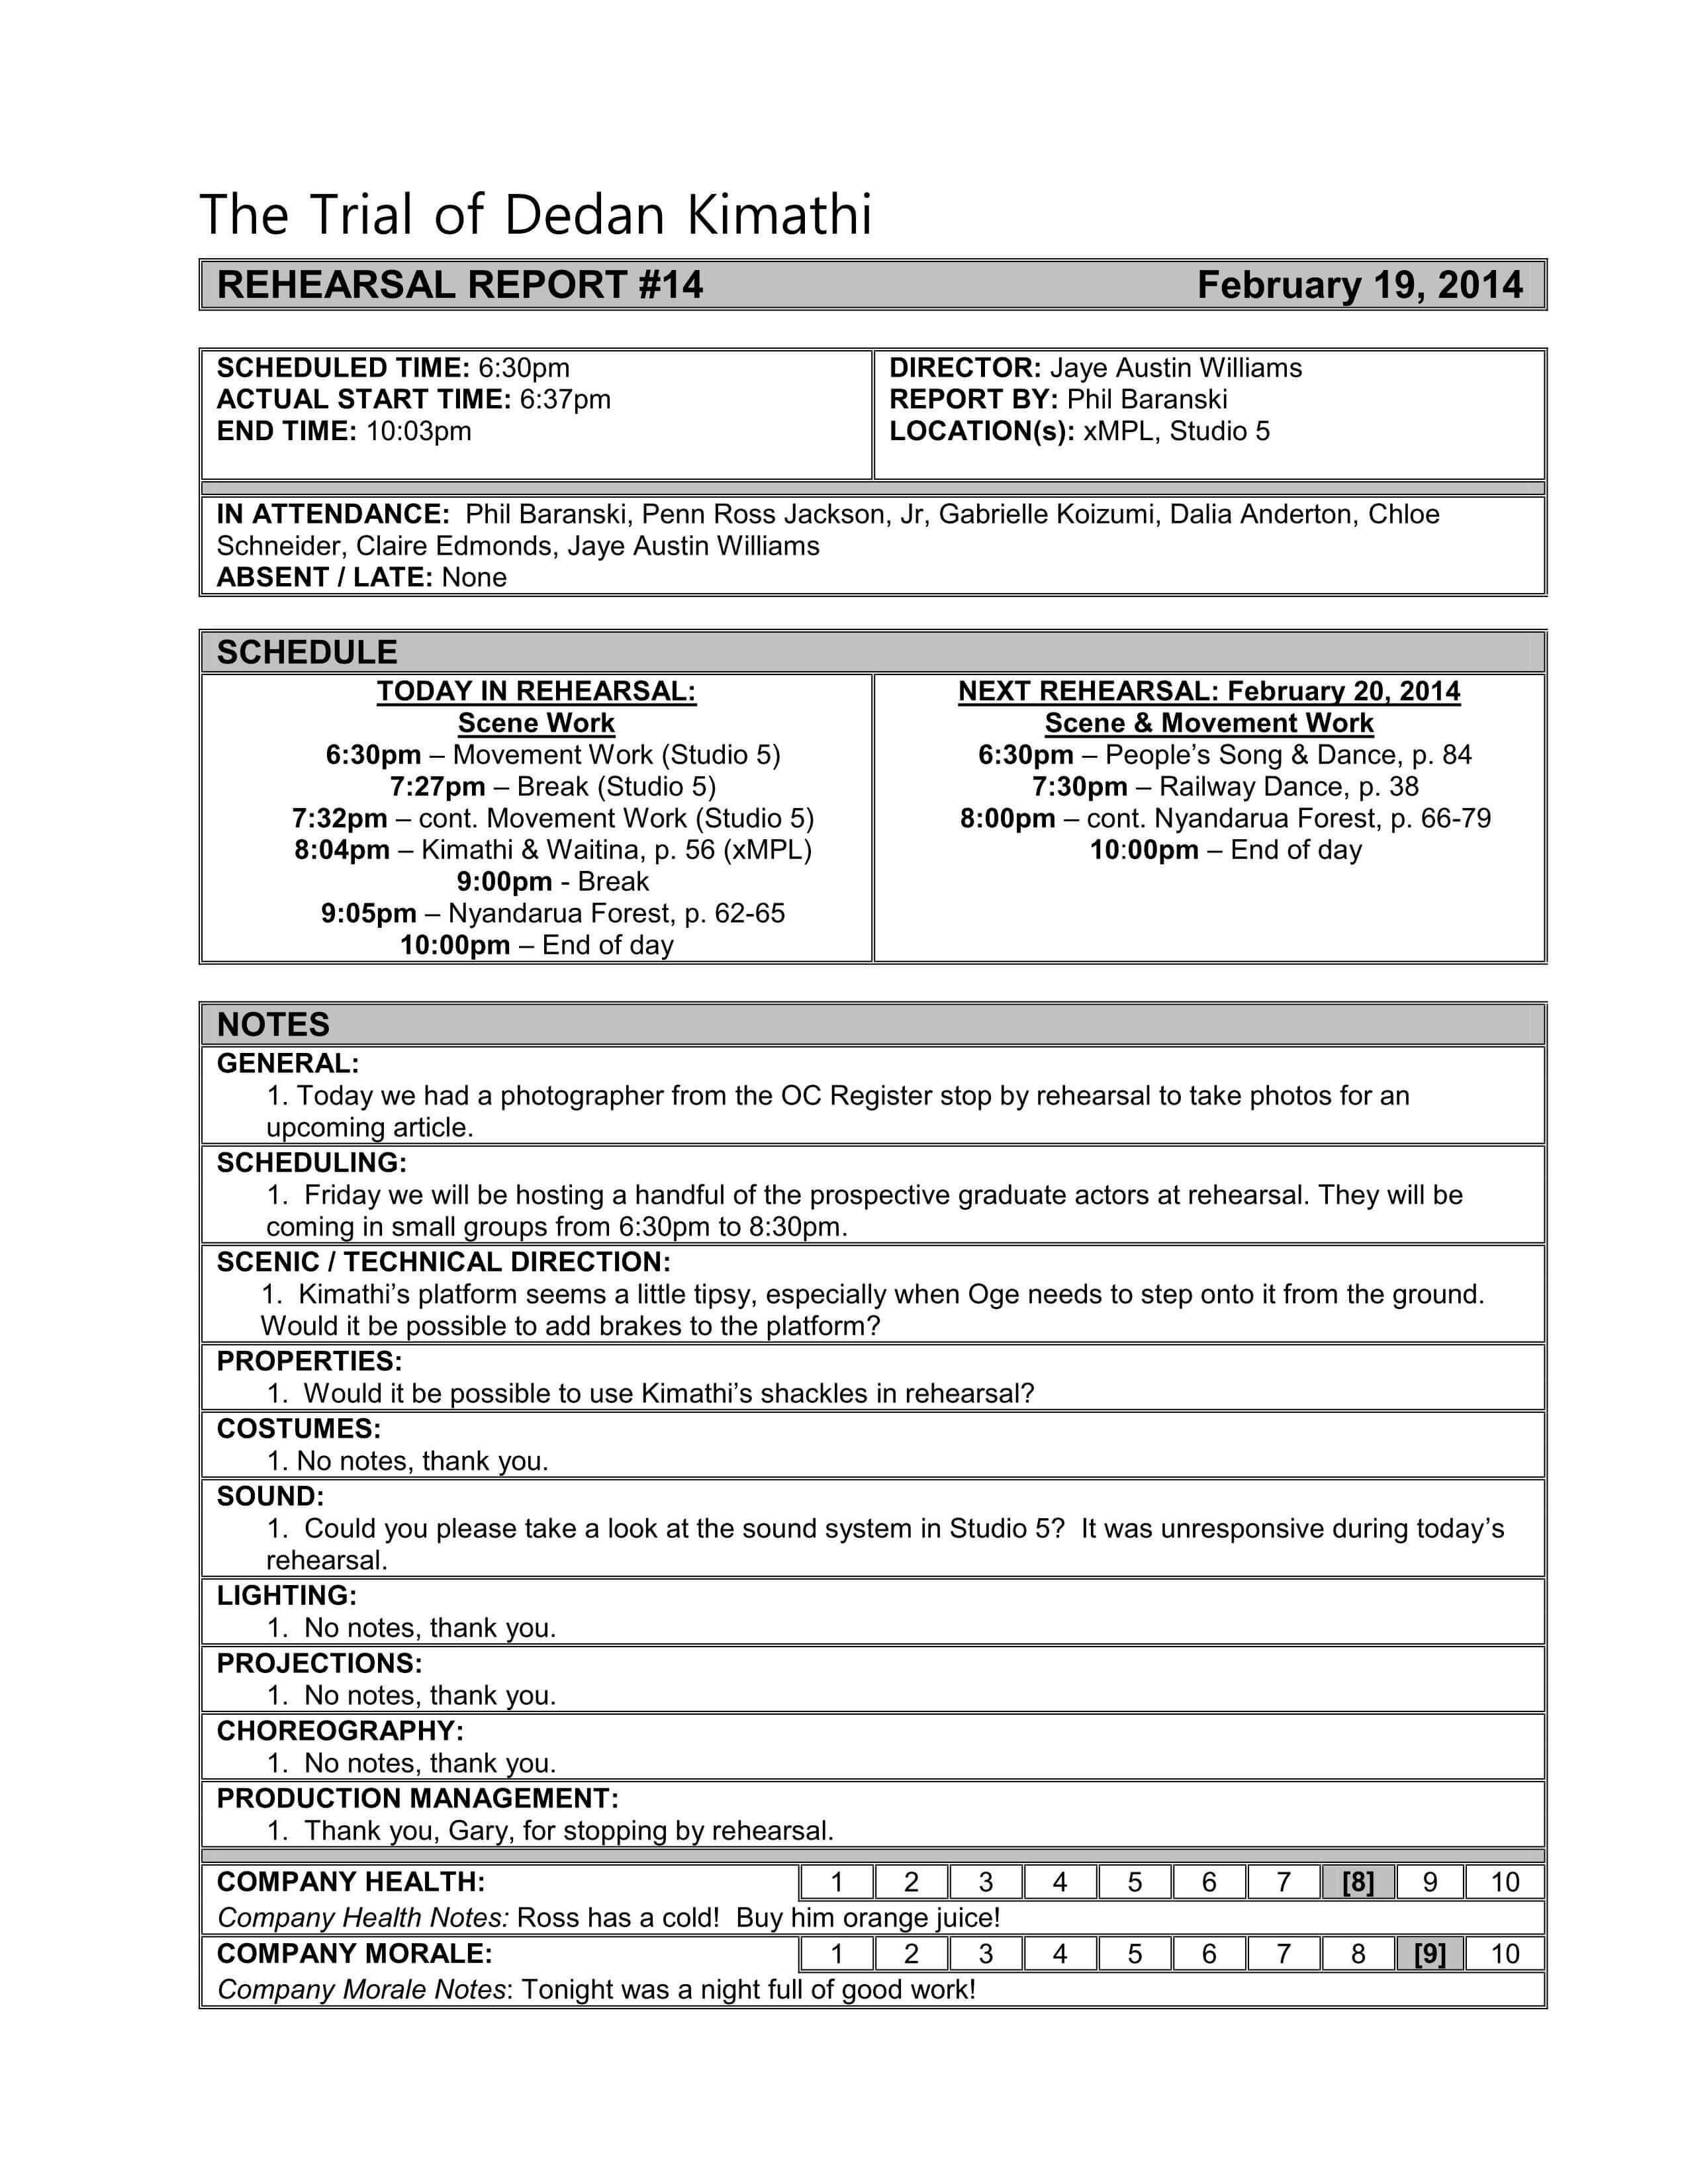 Image Result For Stage Manager Rehearsal Report | Drama With Regard To Rehearsal Report Template